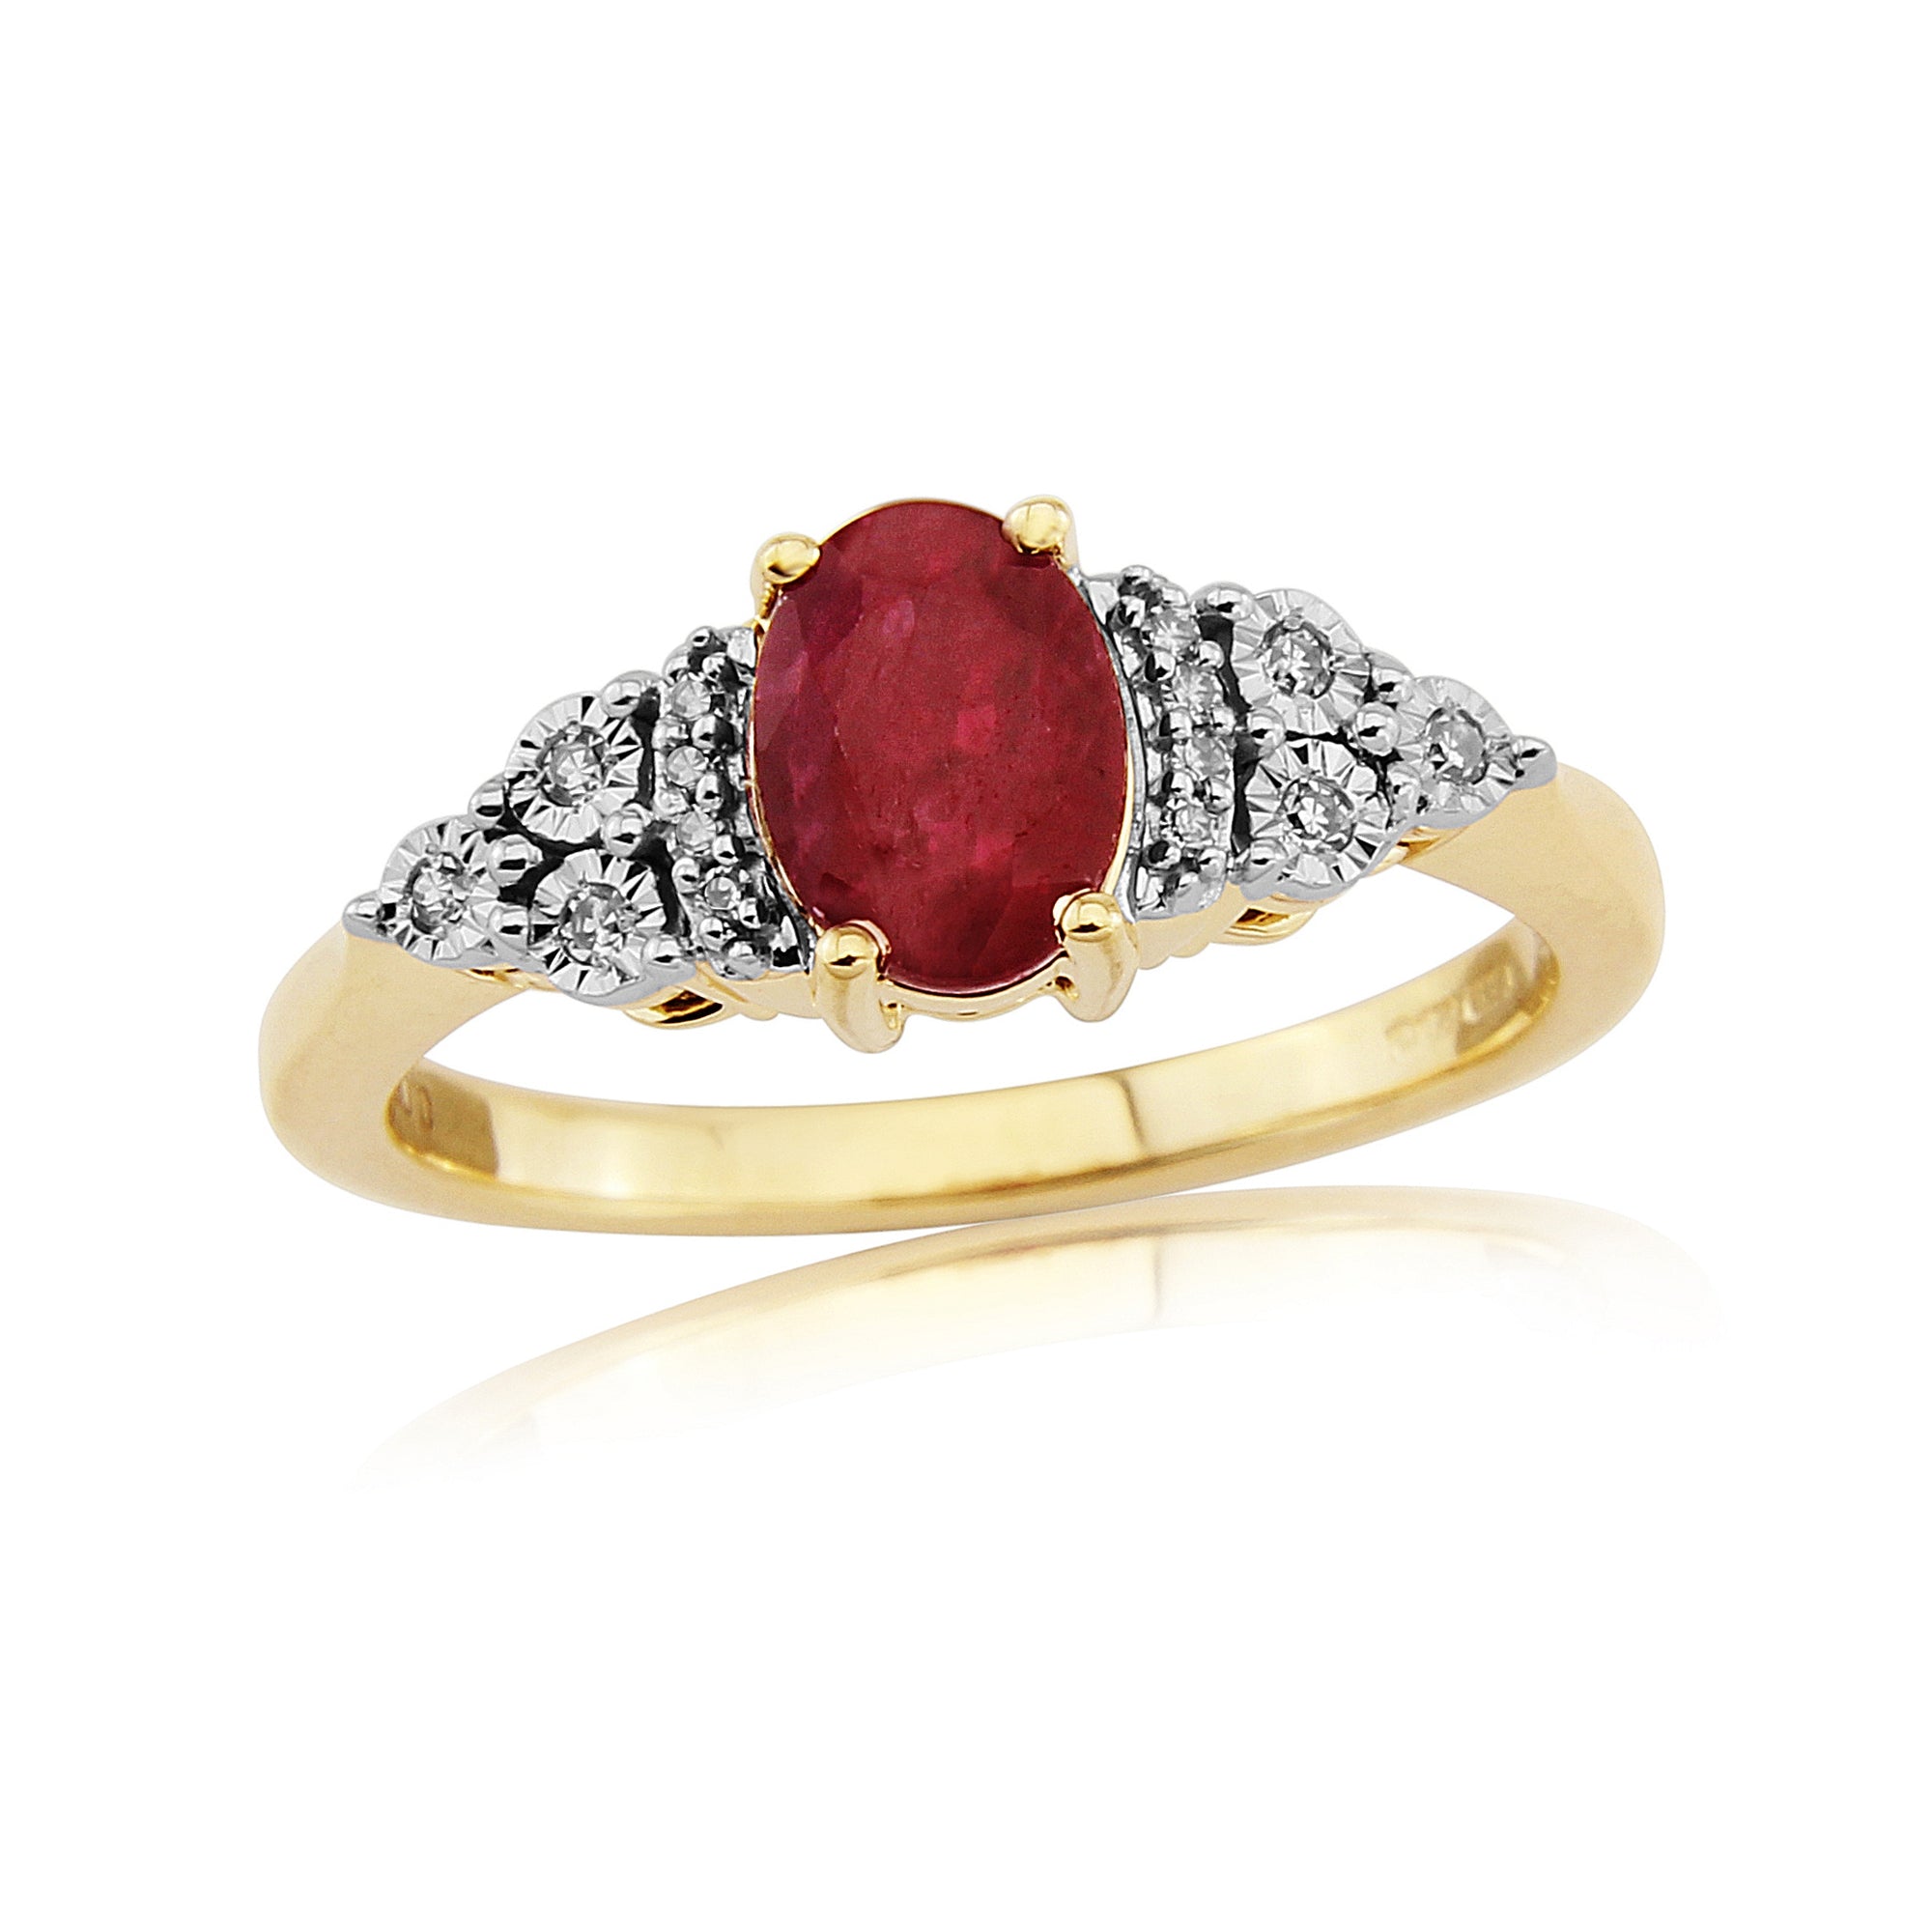 9ct gold 7x5mm oval ruby & miracle plate diamond ring 0.06ct